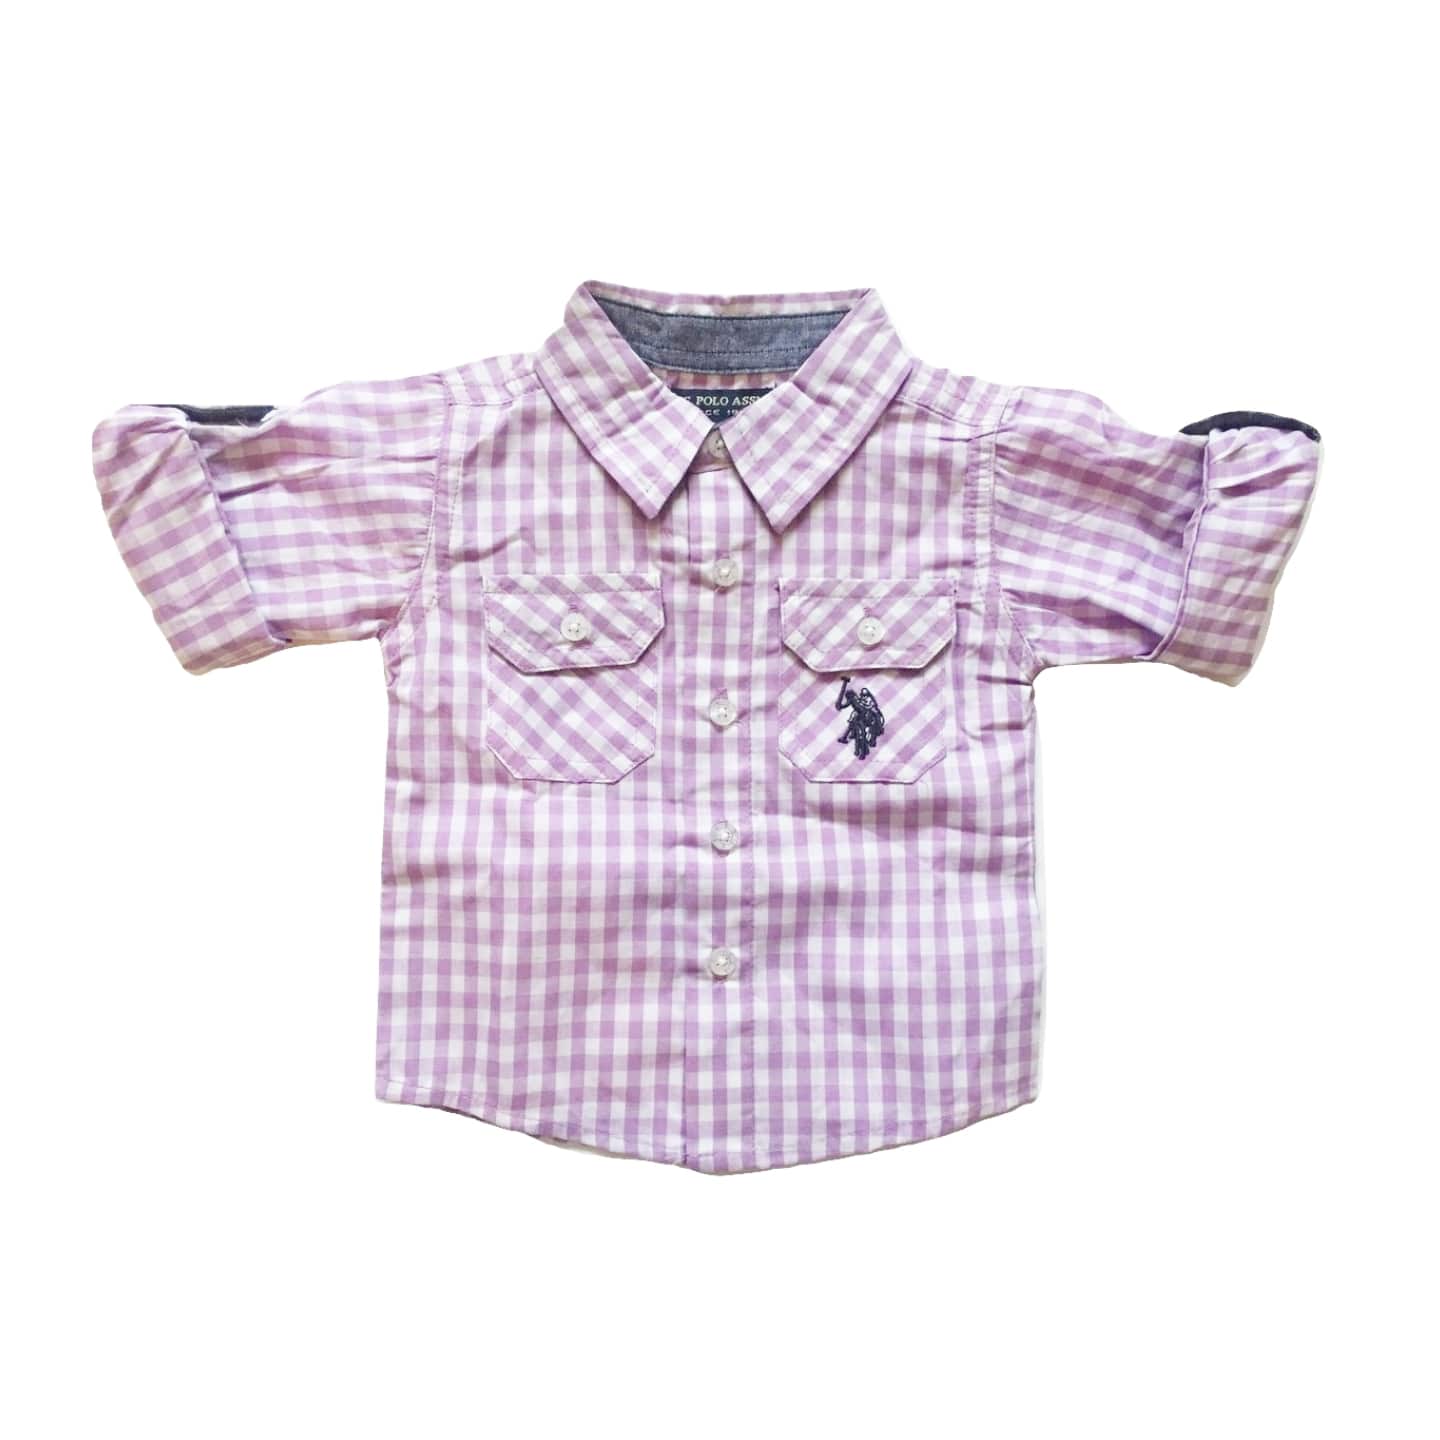 US Polo Assn Boys Purple Checked Short/Longsleeve fold up - Stockpoint Apparel Outlet